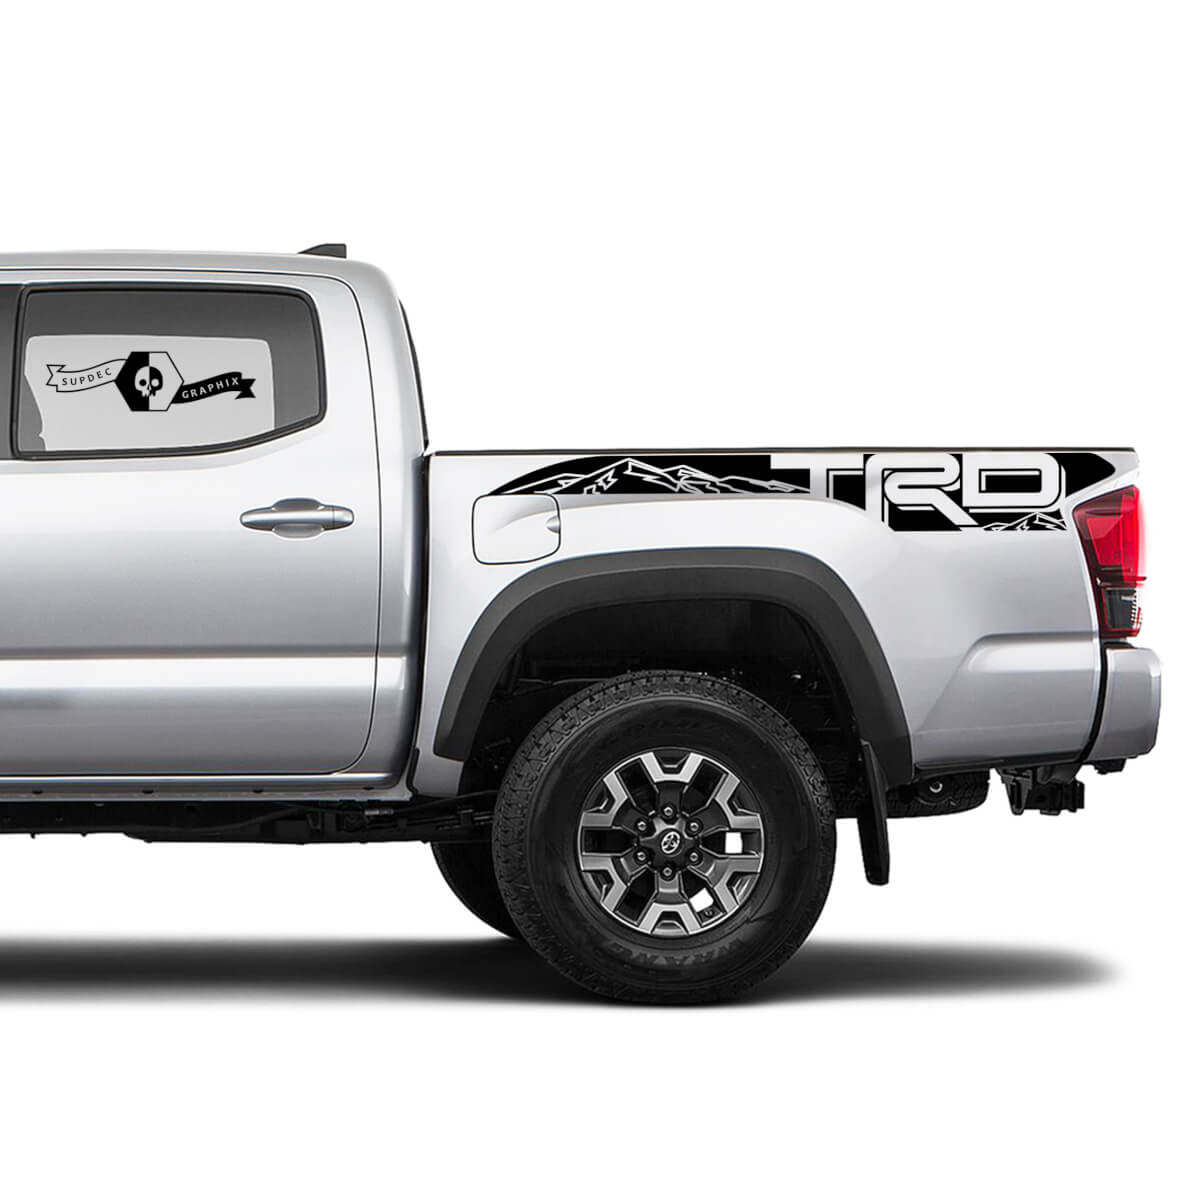 2X Tacoma Toyota TRD Off Road Truck Bed Mountains side Decals Vinyl Stickers Сurved Mountain Range 